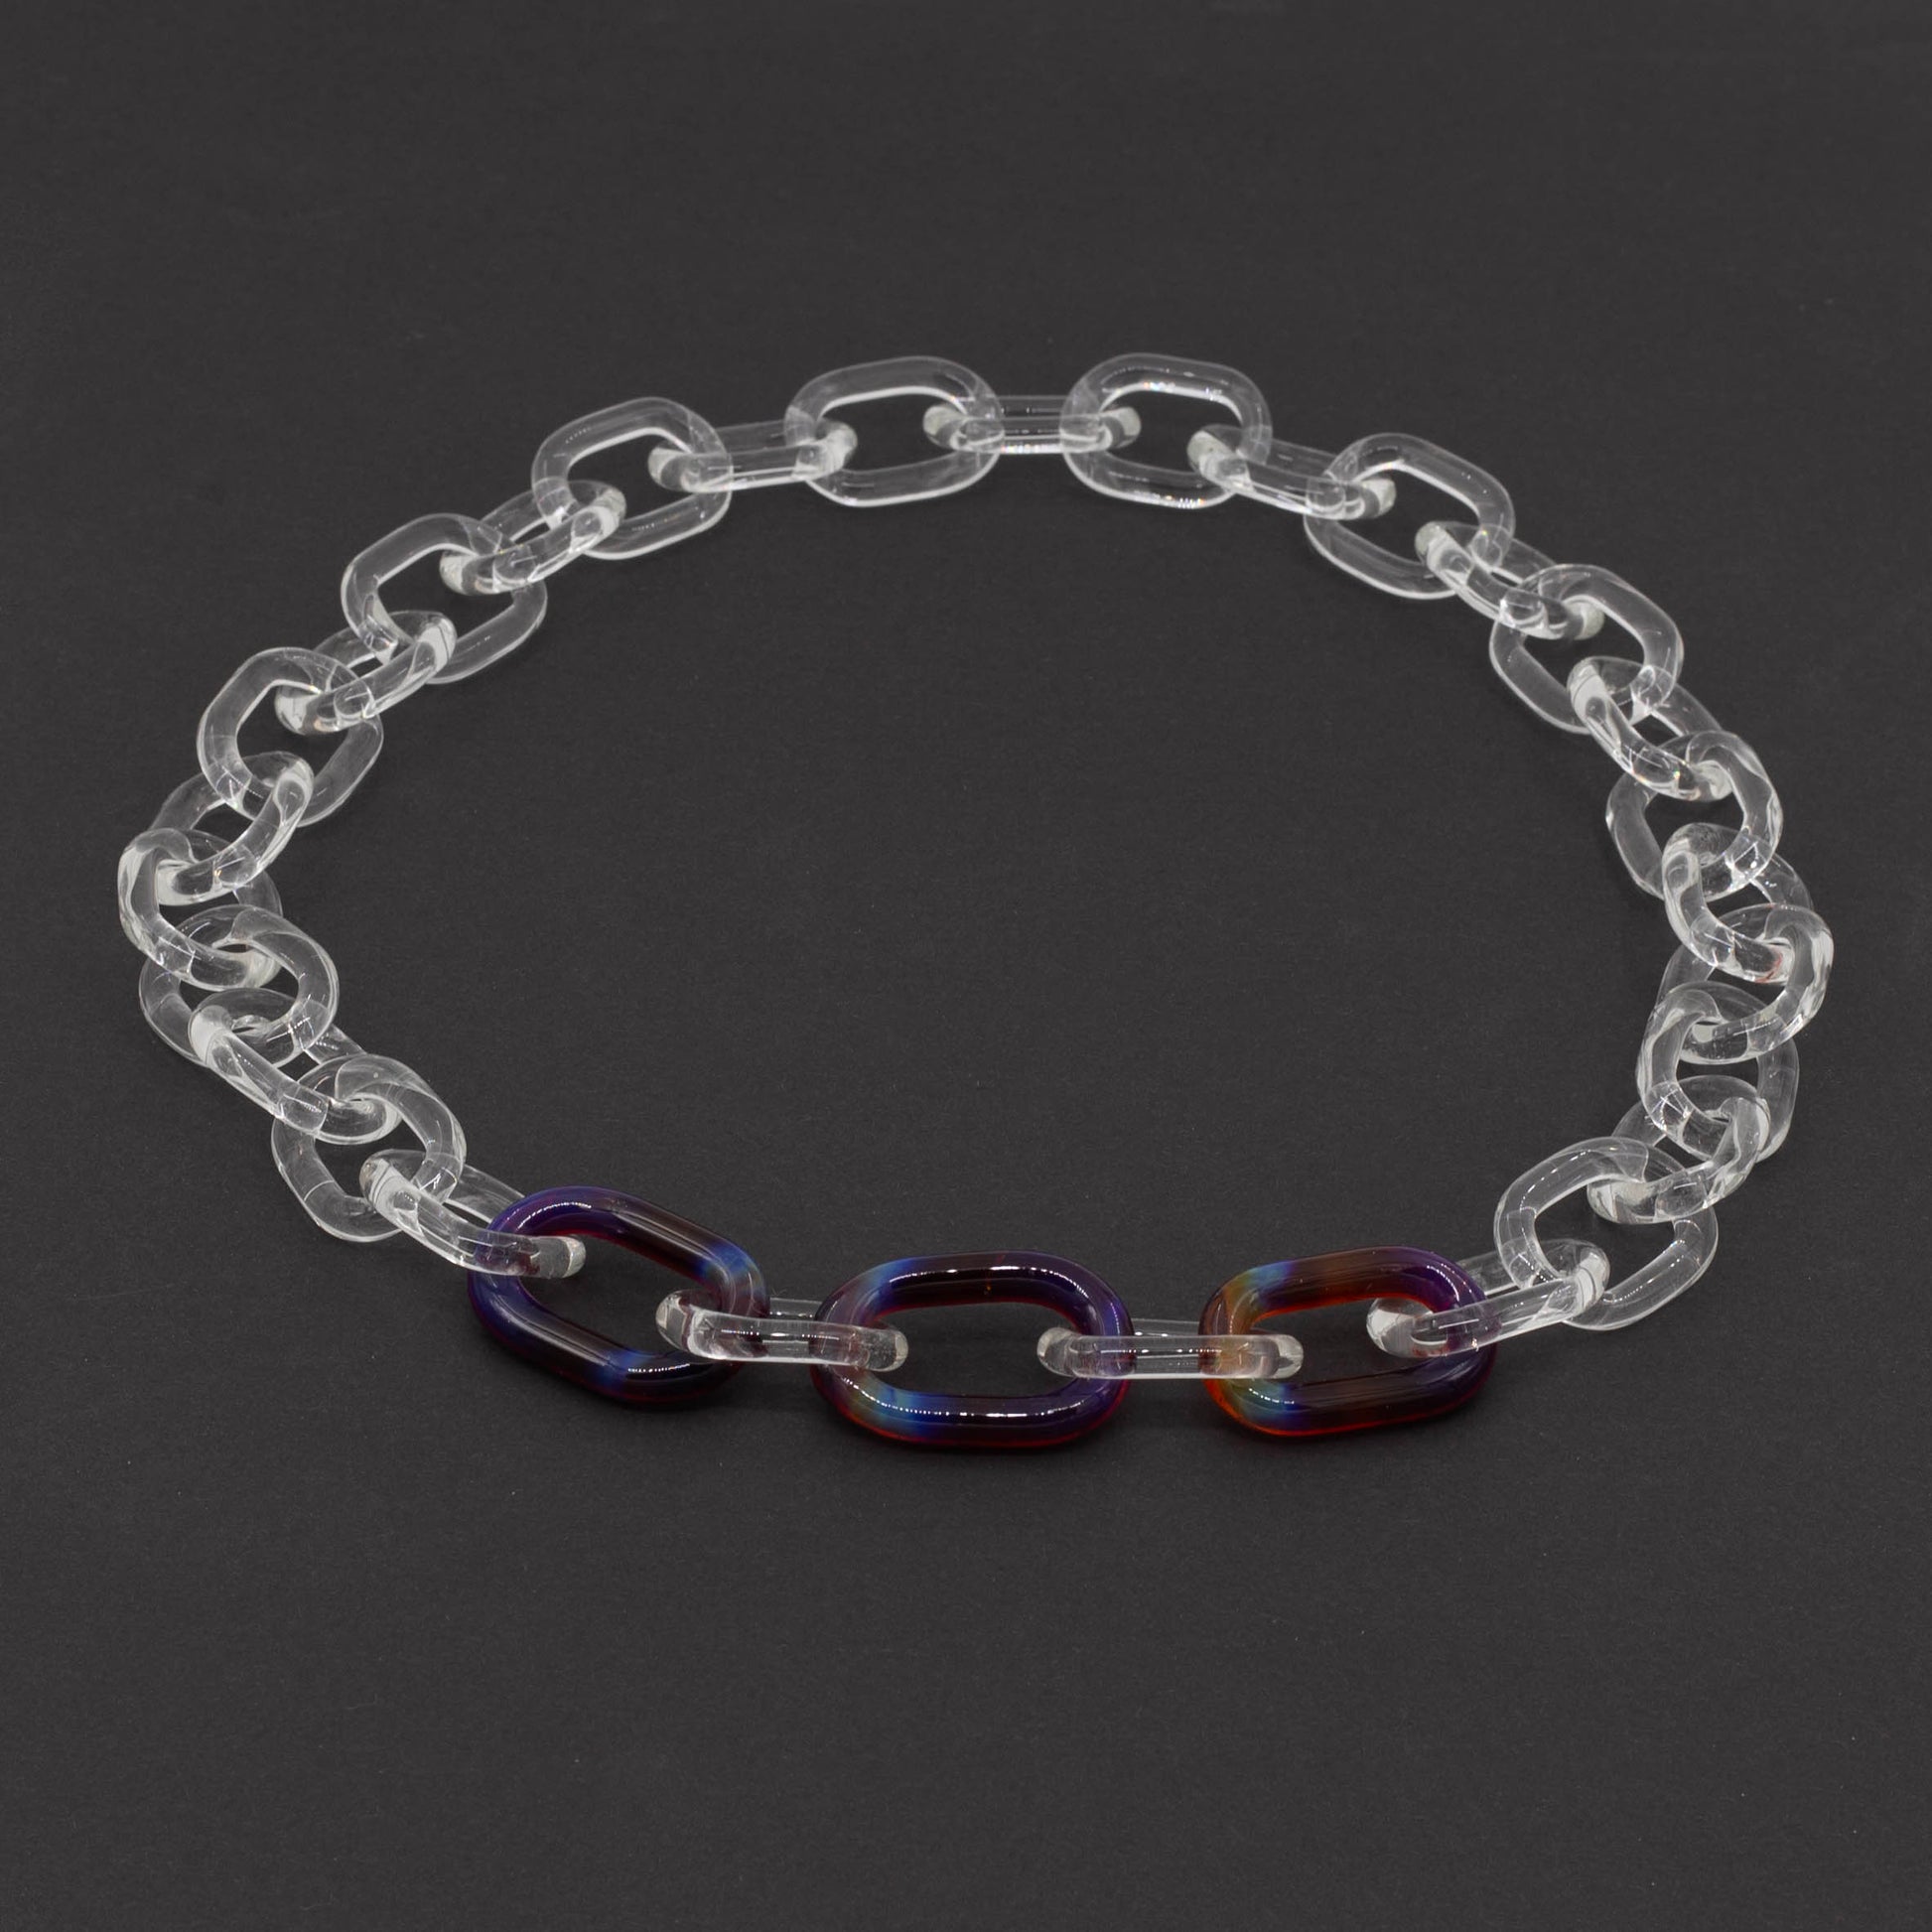 Dark background, necklace made from clear glass links with 3 coloured links